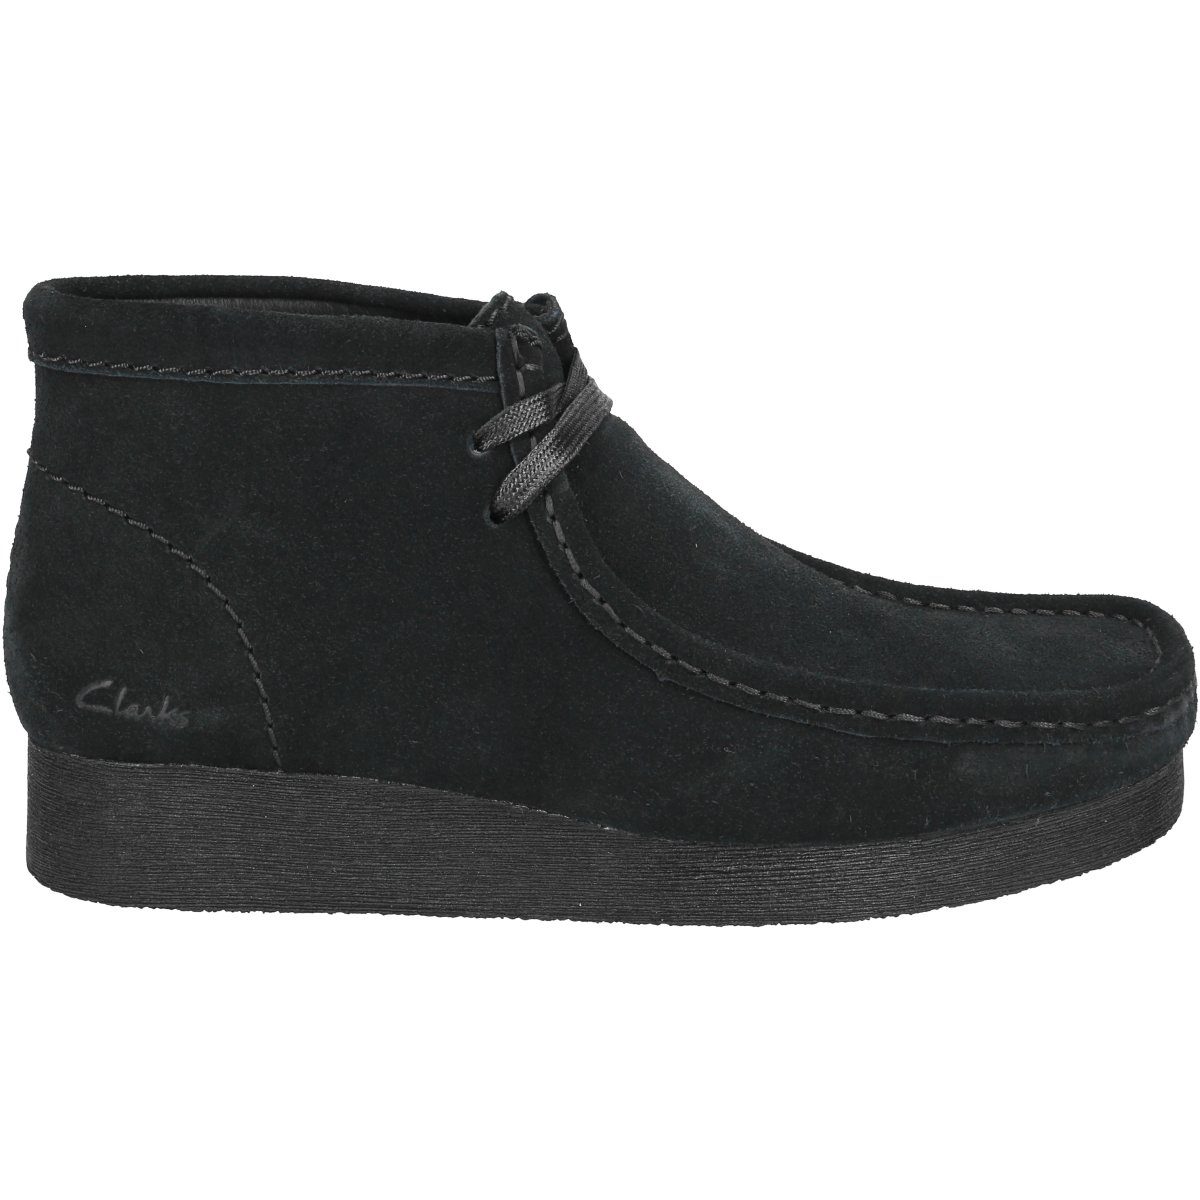 Wallabee 2 Stiefel 4 26161529 Boot Clarks